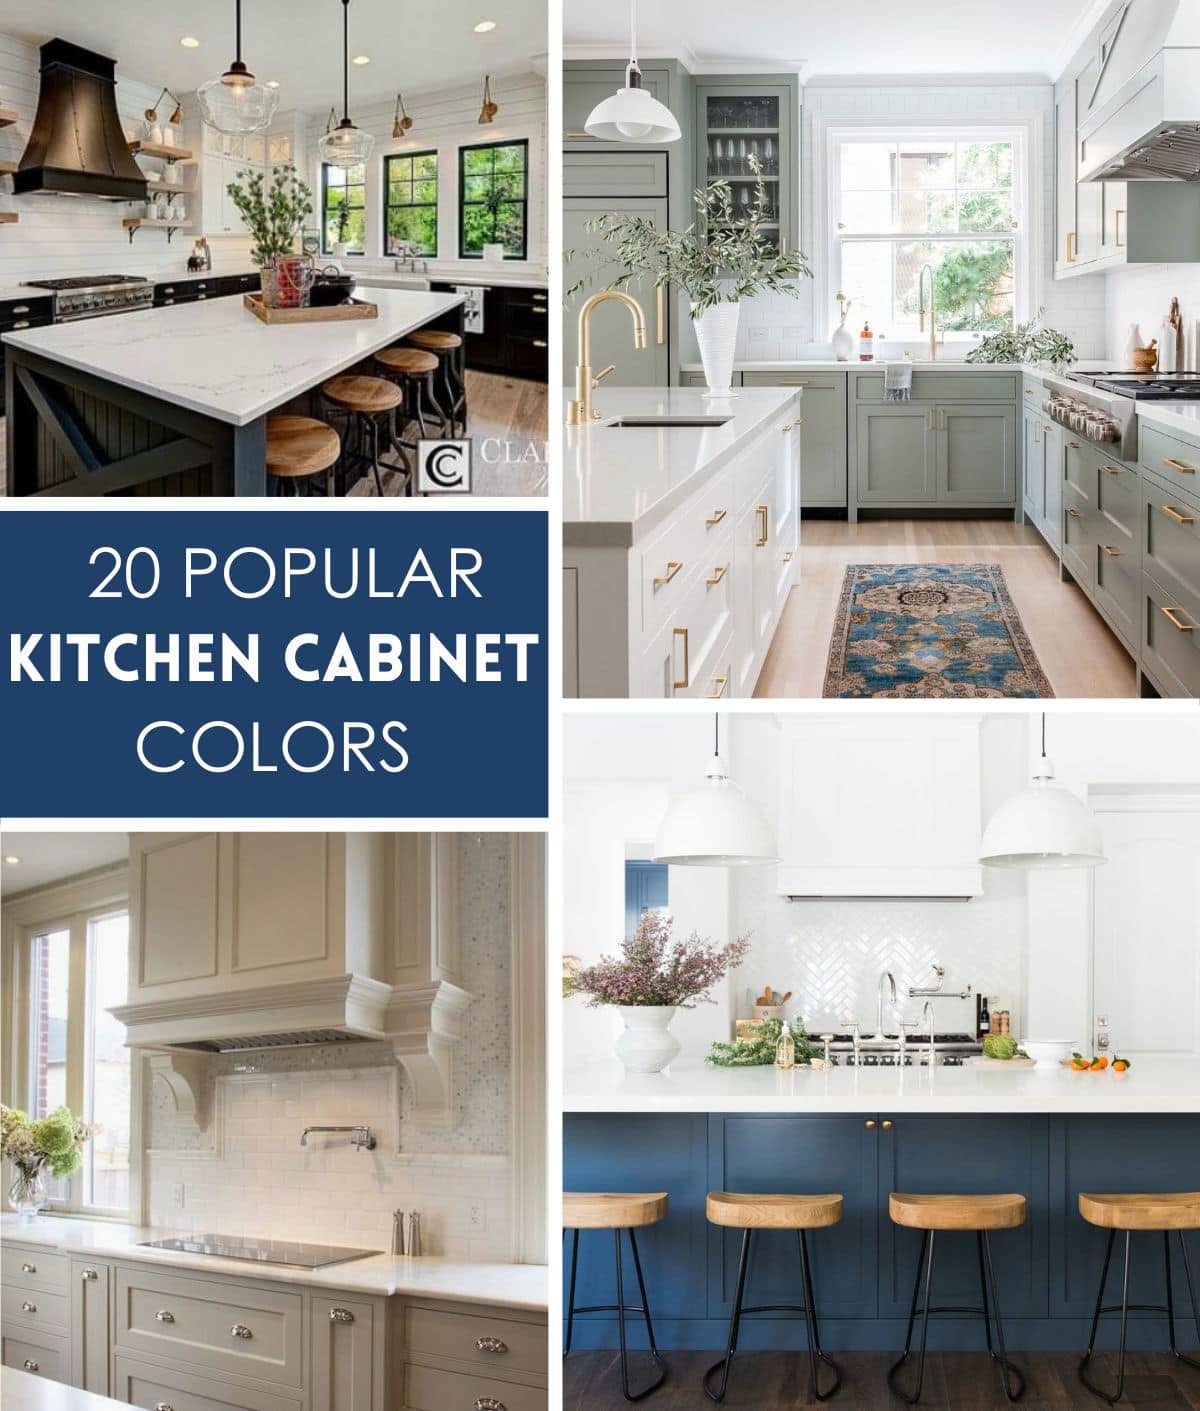 Four images of different kitchen cabinet colors including black, sage green, beige, and navy paint colors.